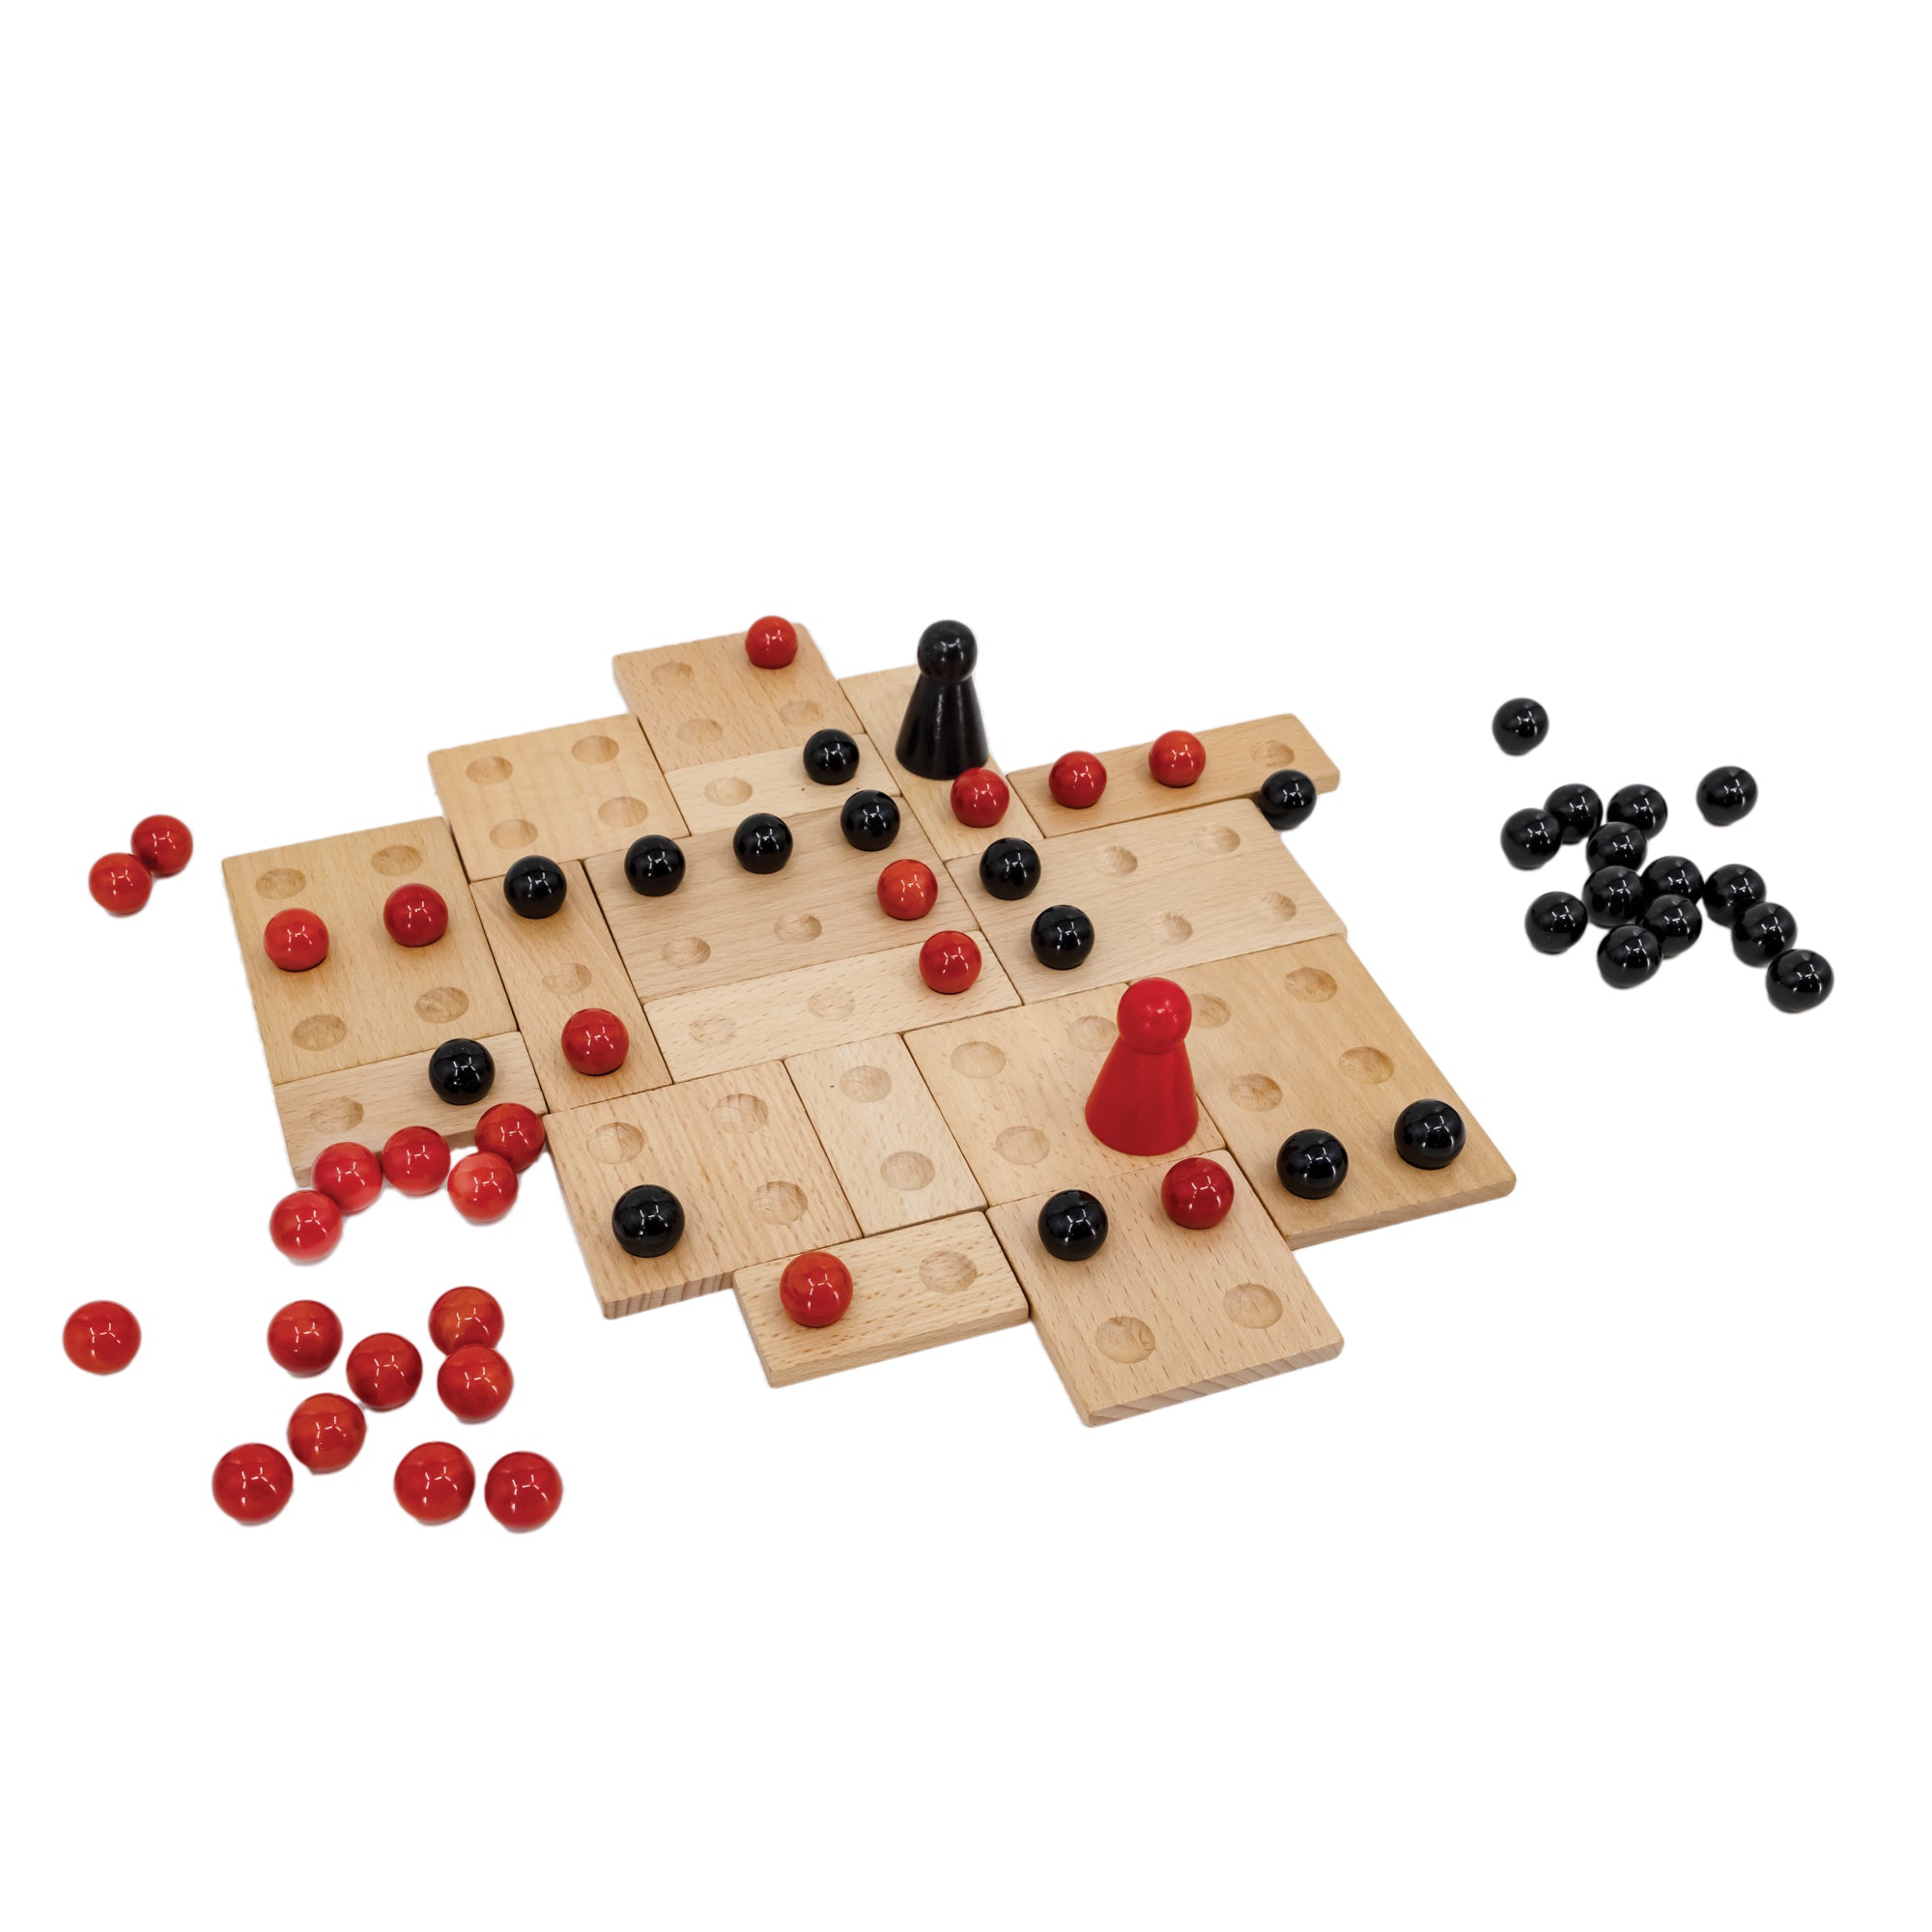 Kulami game in play. There are many square and rectangle wood pieces with divots to place black and red marbles. The wood pieces are placed randomly against each other for form a gapless board. The marbles are randomly placed on top with 2, larger, cone-shaped pieces with a rounded top in the middle; 1 red, and 1 black. There is a pile of black marbles off to the right of the board and a pile of red marbles off to the left of the board.